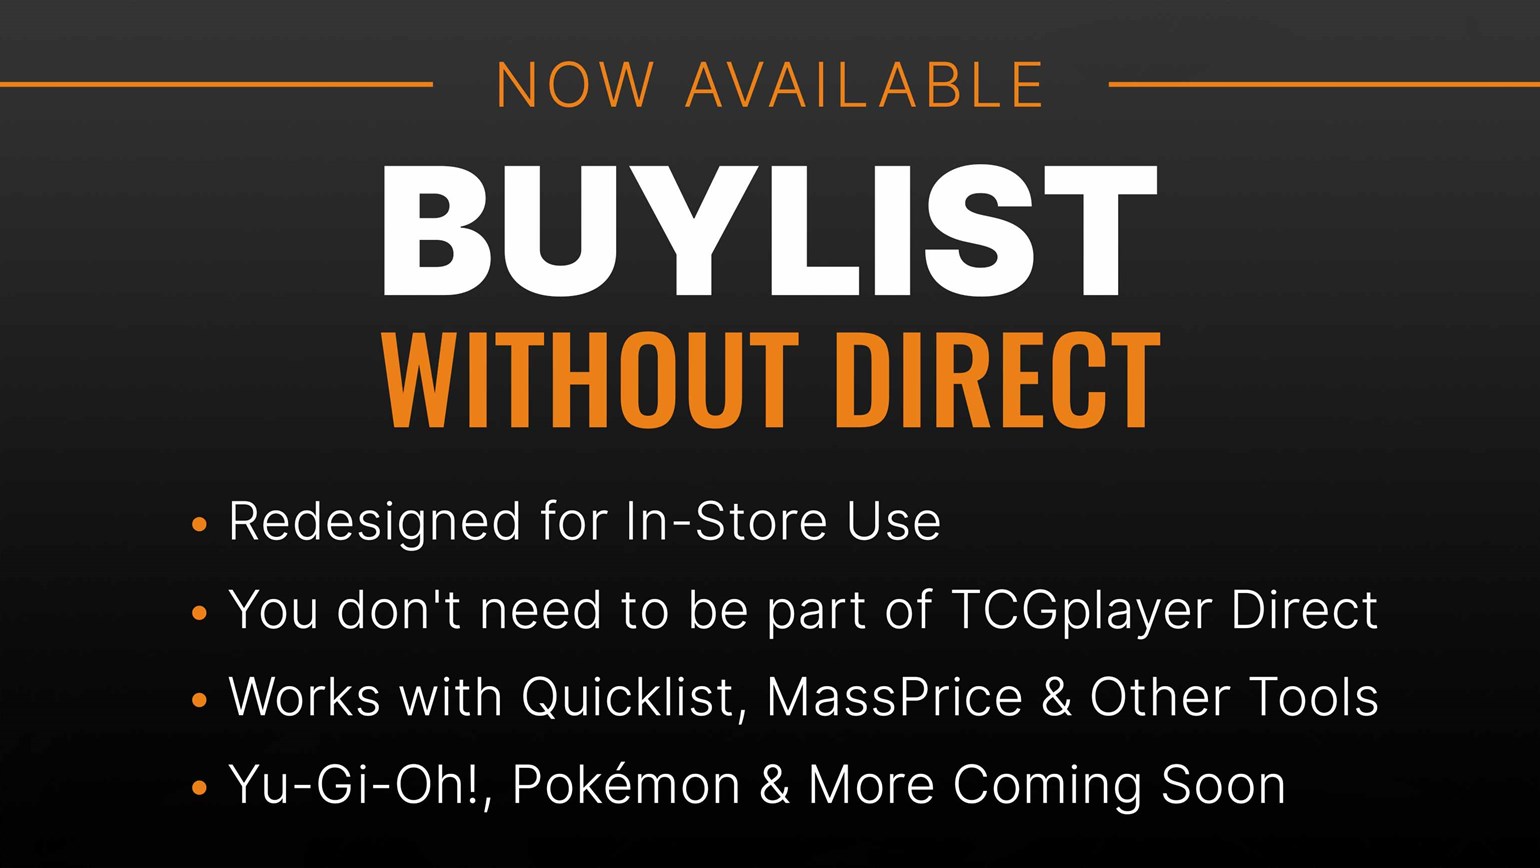 Buylist Without Direct Available for All Pro Sellers to Restock Inventory & Grow Profits